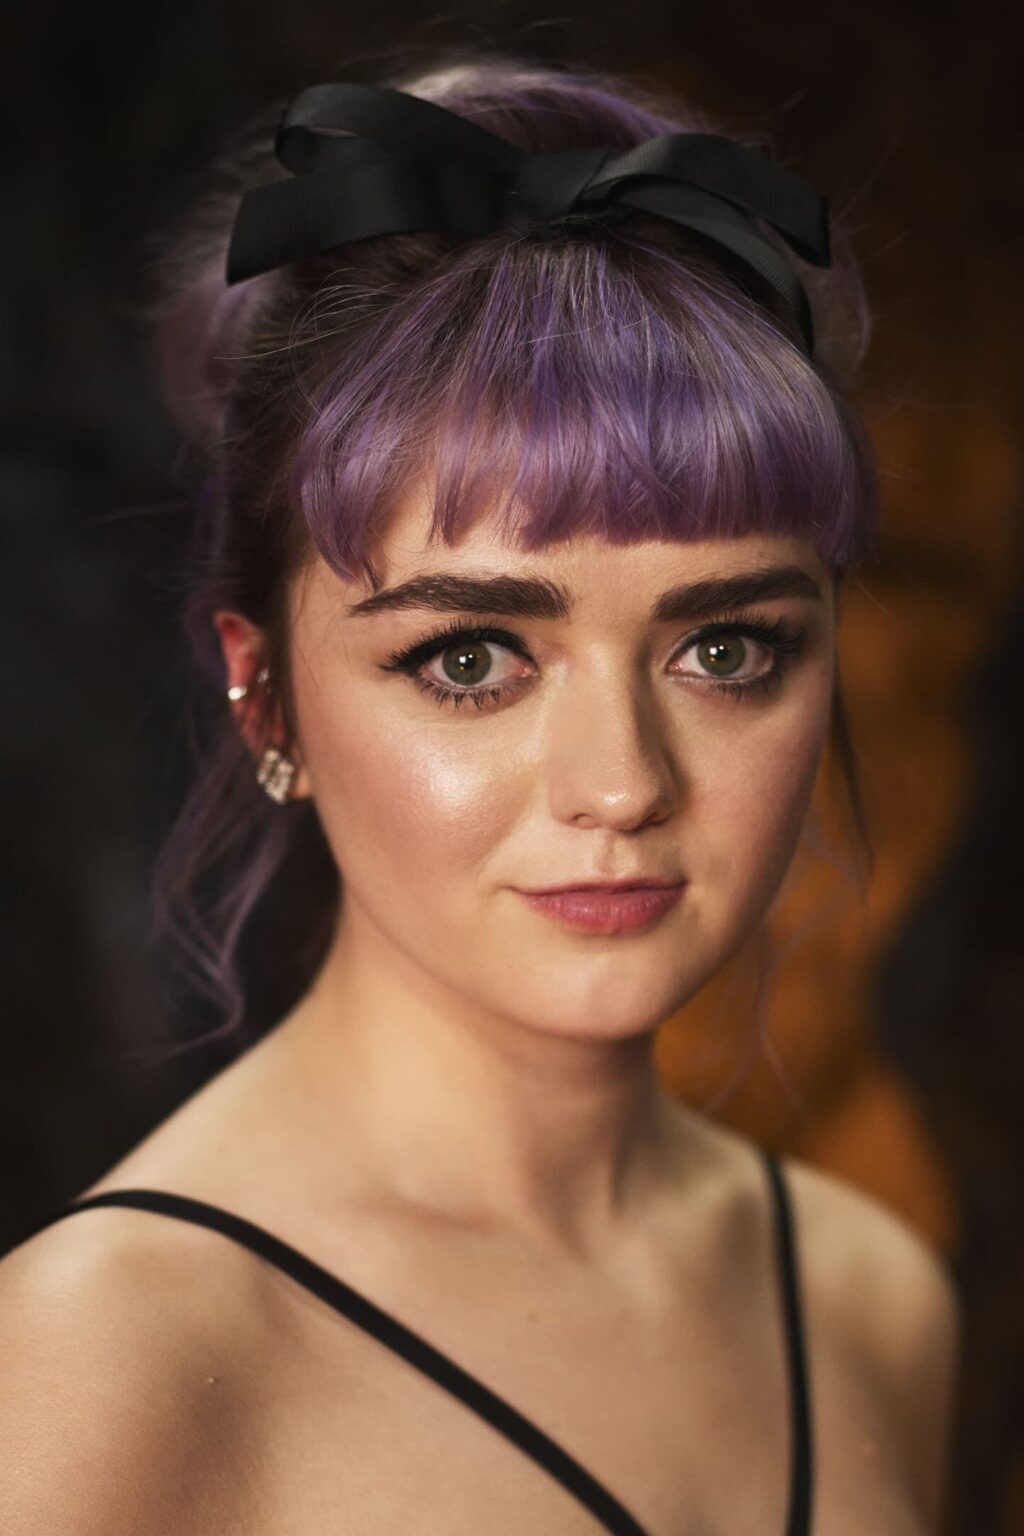 Maisie Williams Interesting Facts, Age, Net Worth, Biography, Wiki TNHRCE